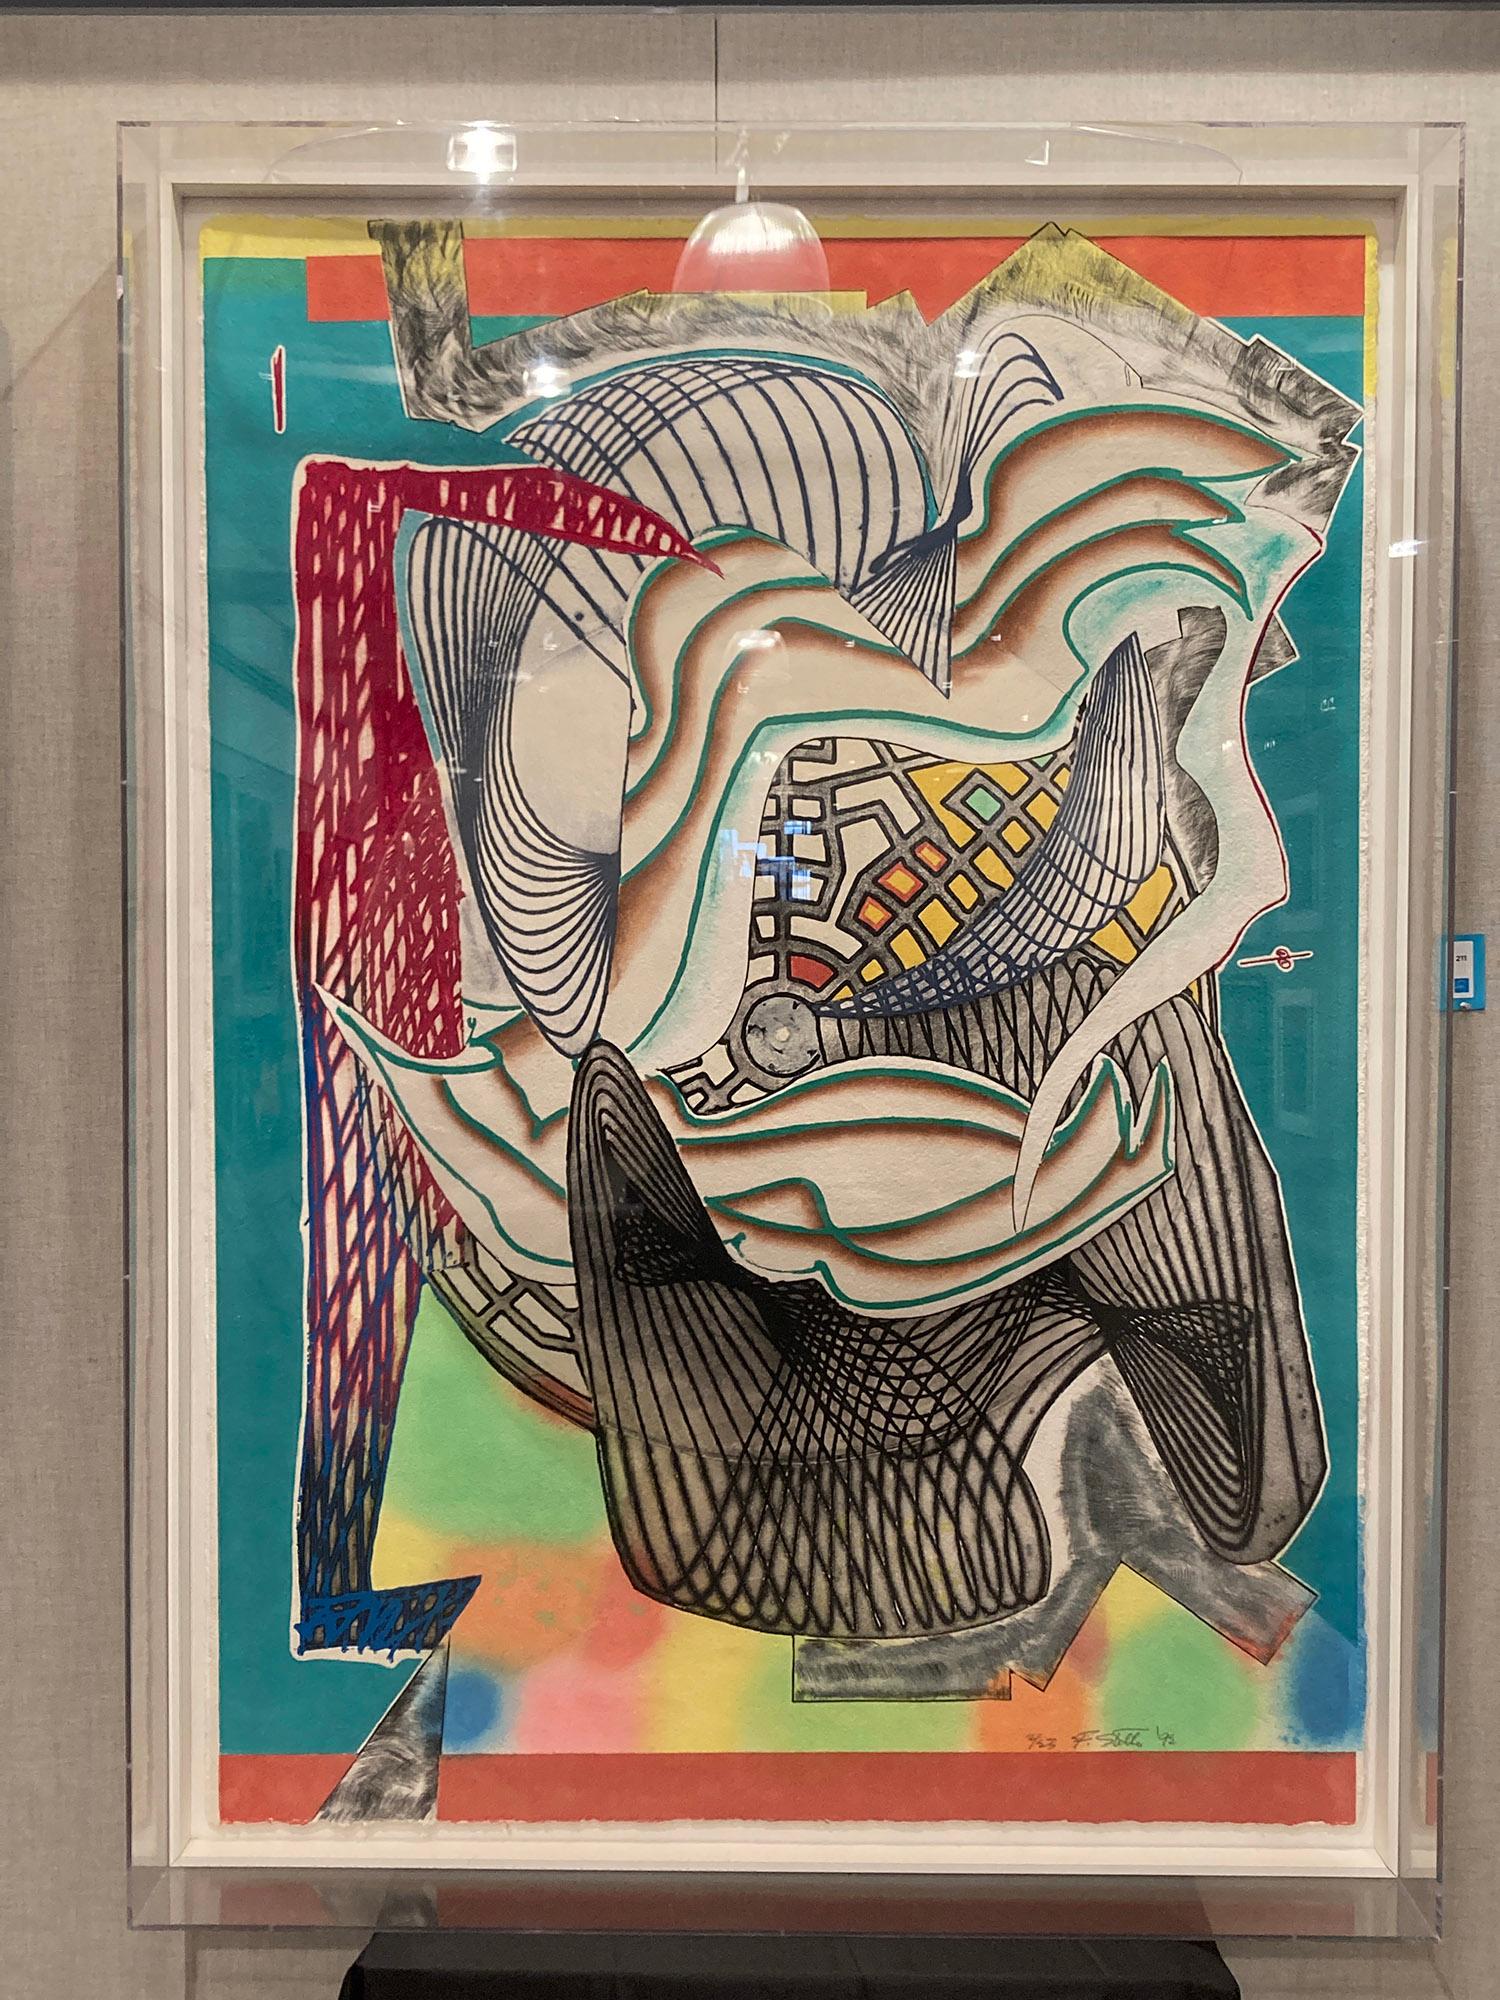 The Funeral (Dome) From Moby Dick Domes, 1992 - Print by Frank Stella